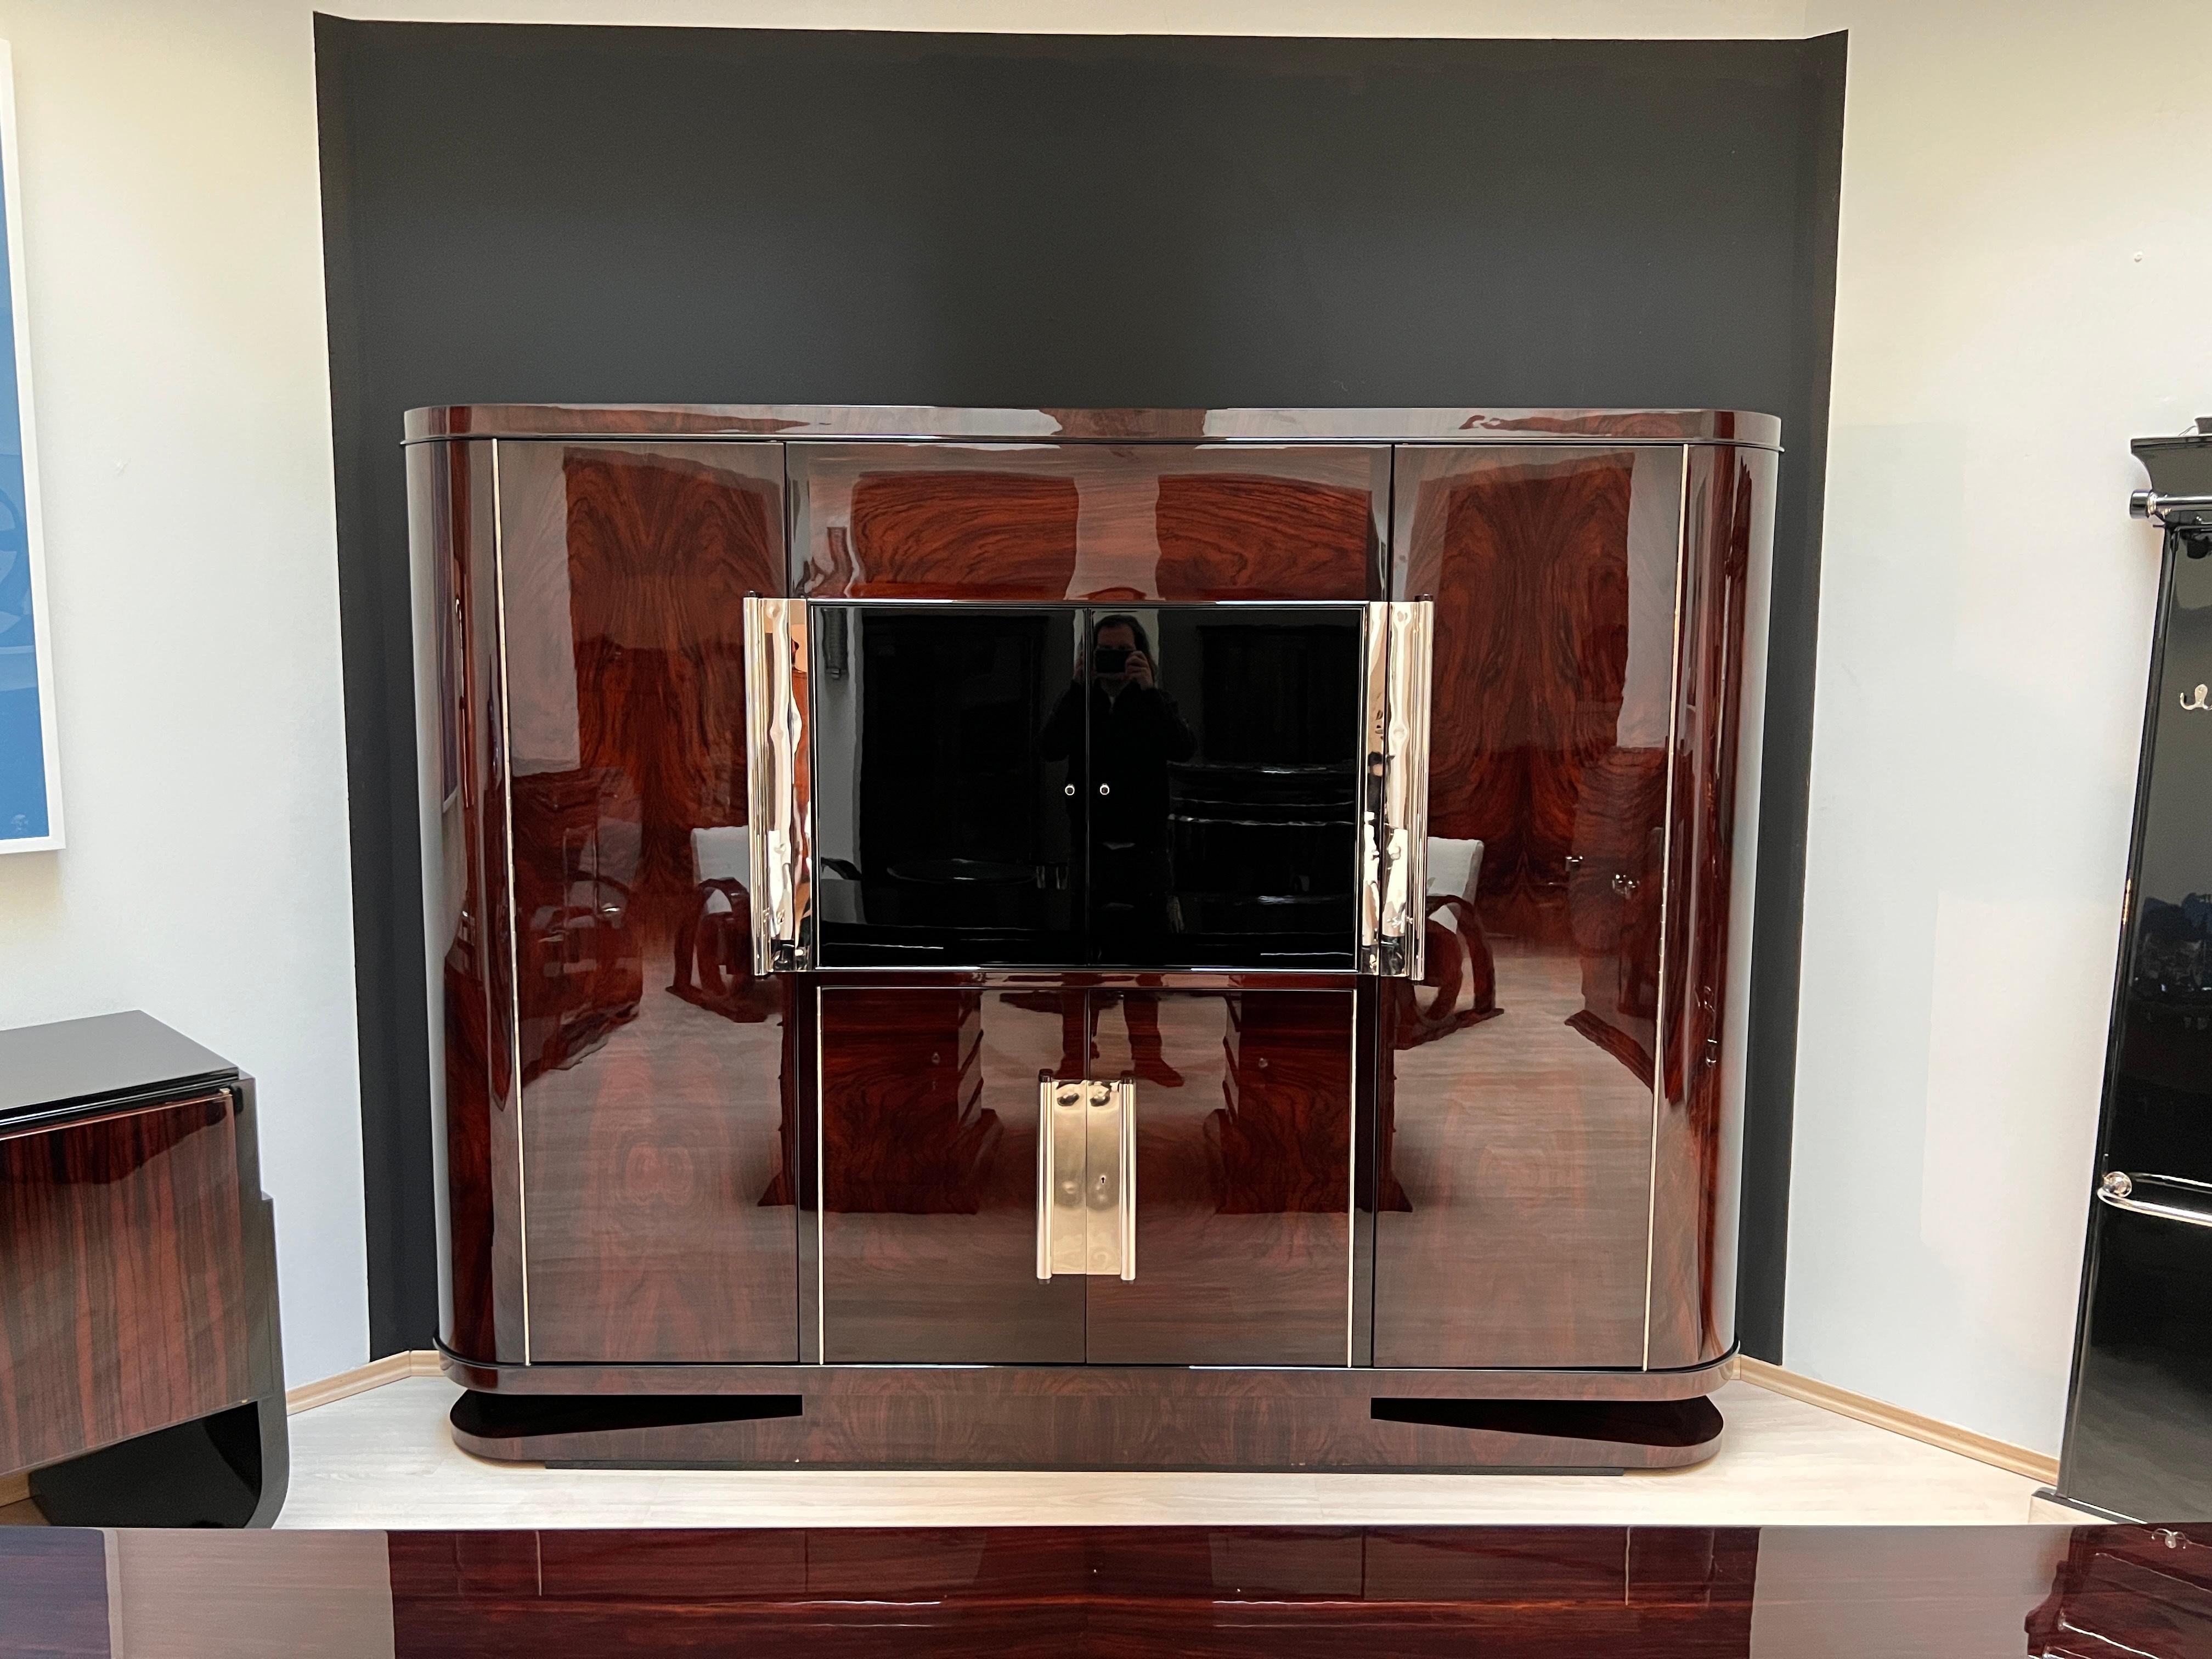 Large original Art Deco Executive Office Cabinet or Bookcase in Rosewood and black piano lacquer. 
Wonderful Rosewood (Palisander) veneer pattern and beautiful long original nickel-plated handles. 
Two rounded high doors in rosewood with adjustable